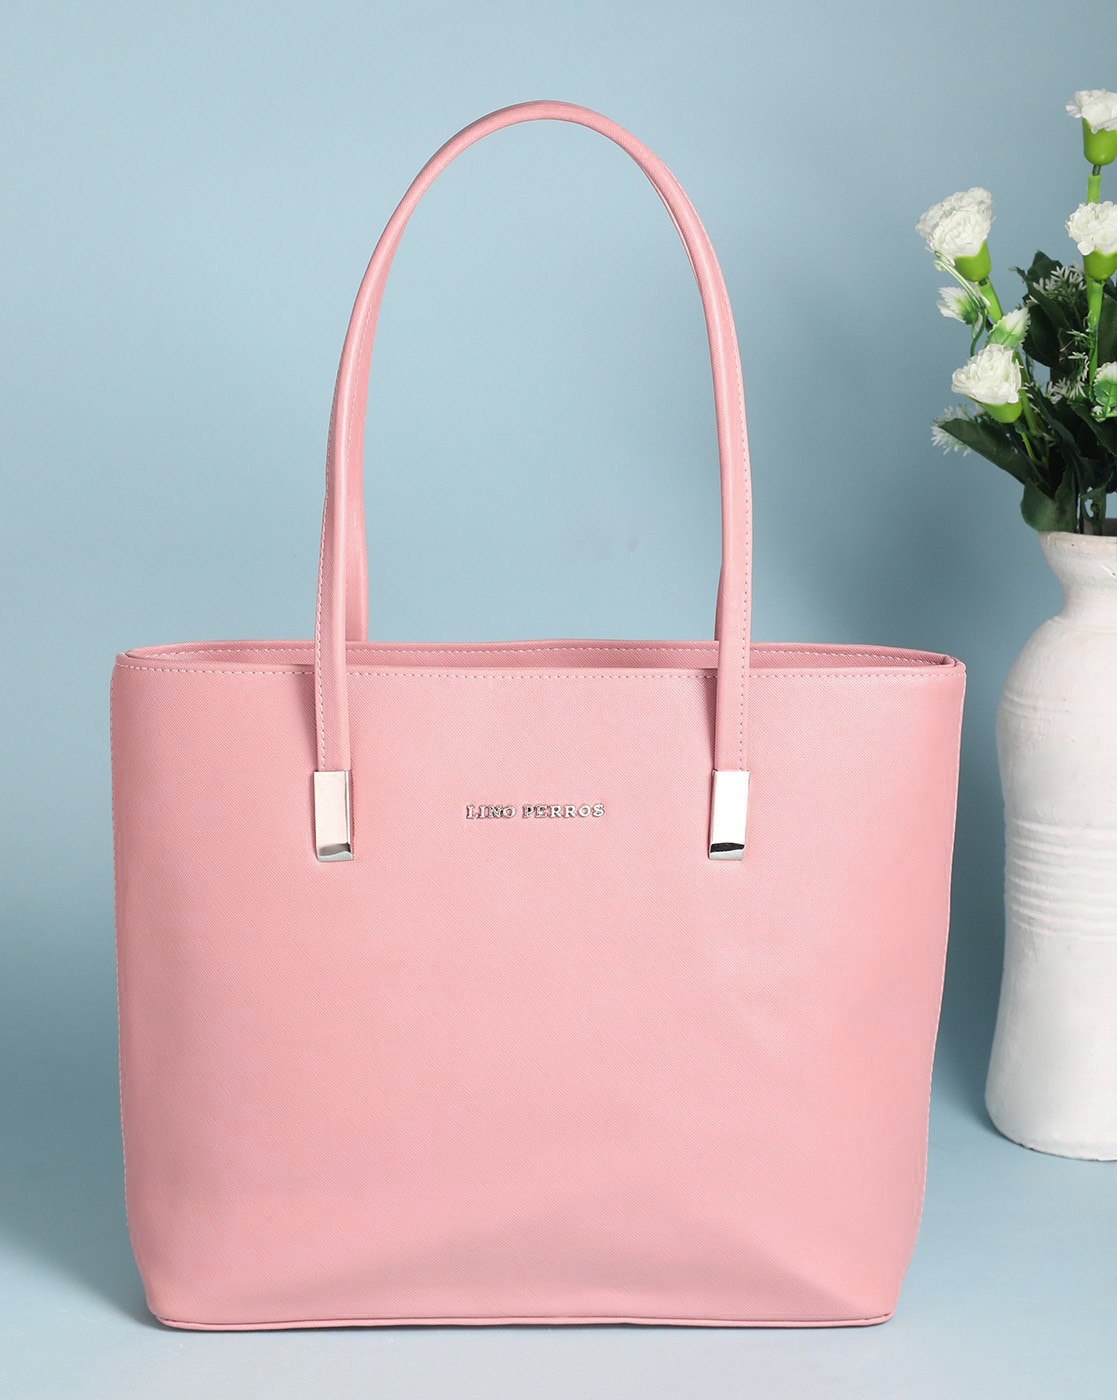 Discover 78+ pink leather tote bags - in.duhocakina